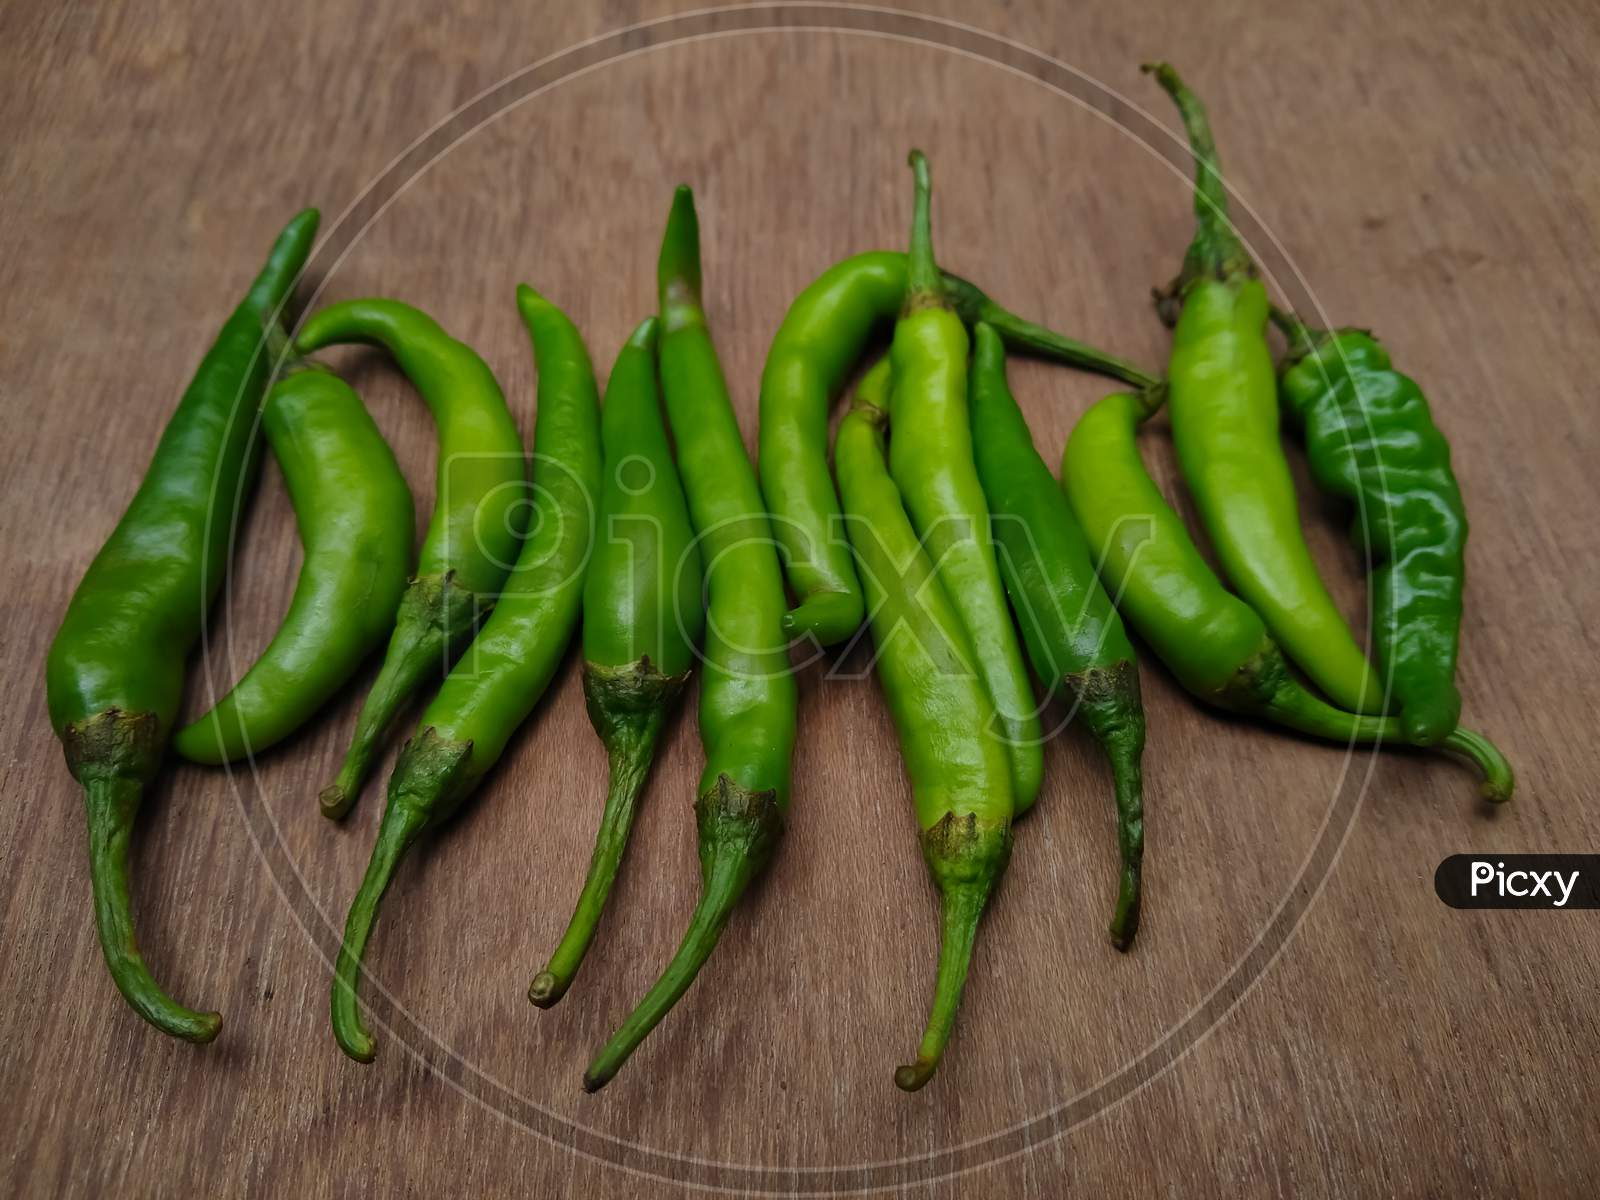 Green chilli peppers on a wooden table